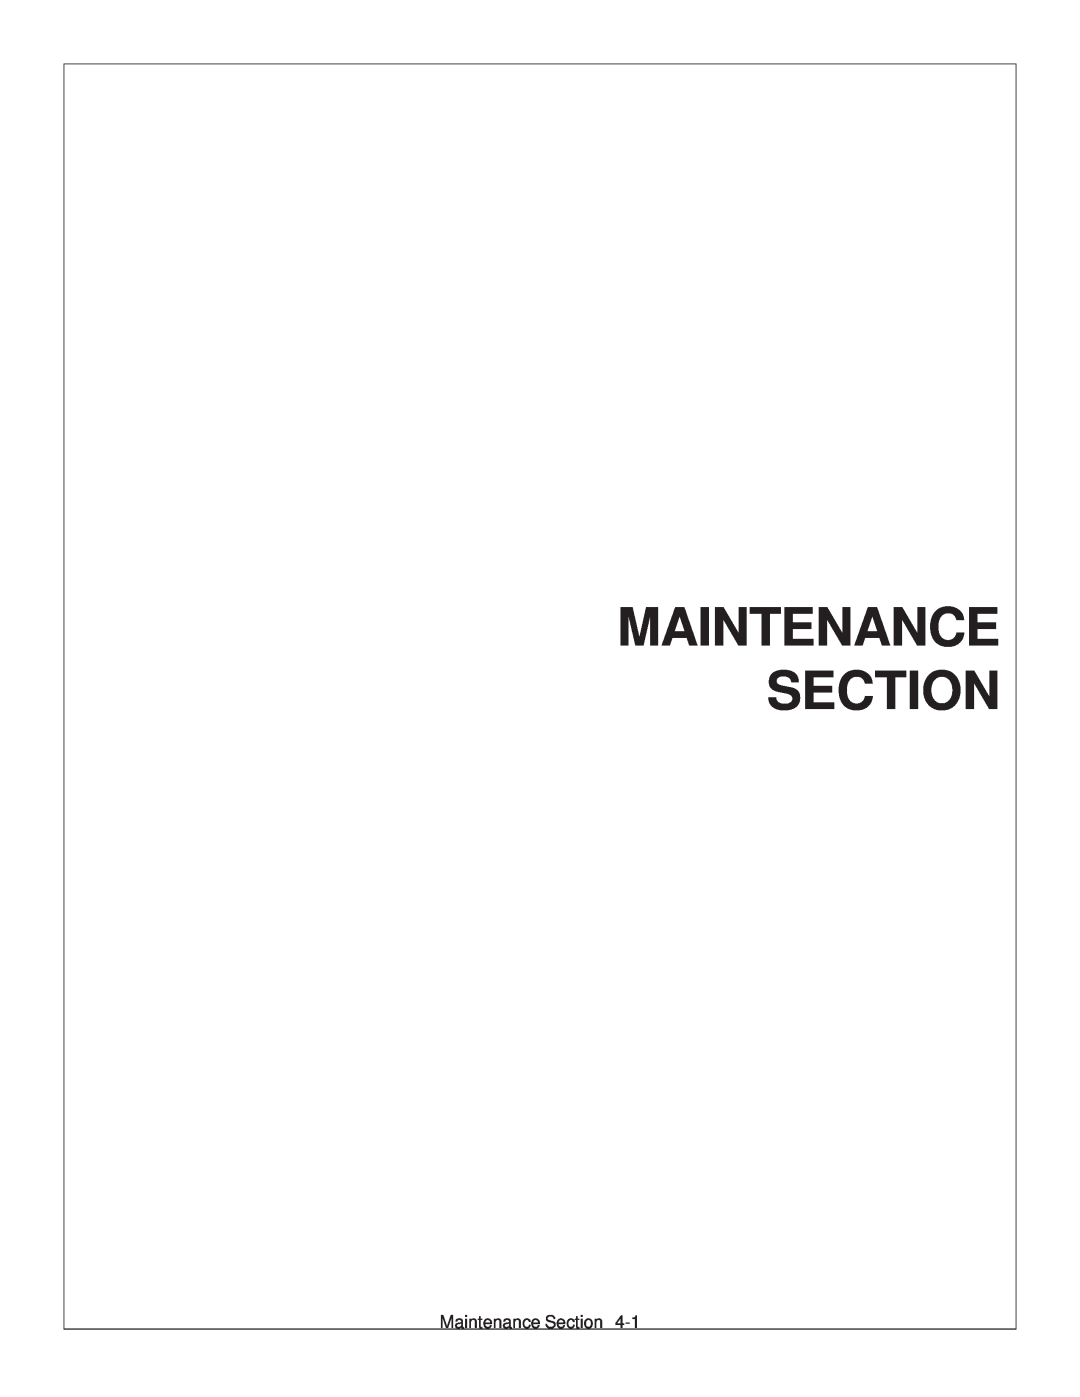 Tiger Products Co., Ltd JD 72-7520 manual Maintenance Section 